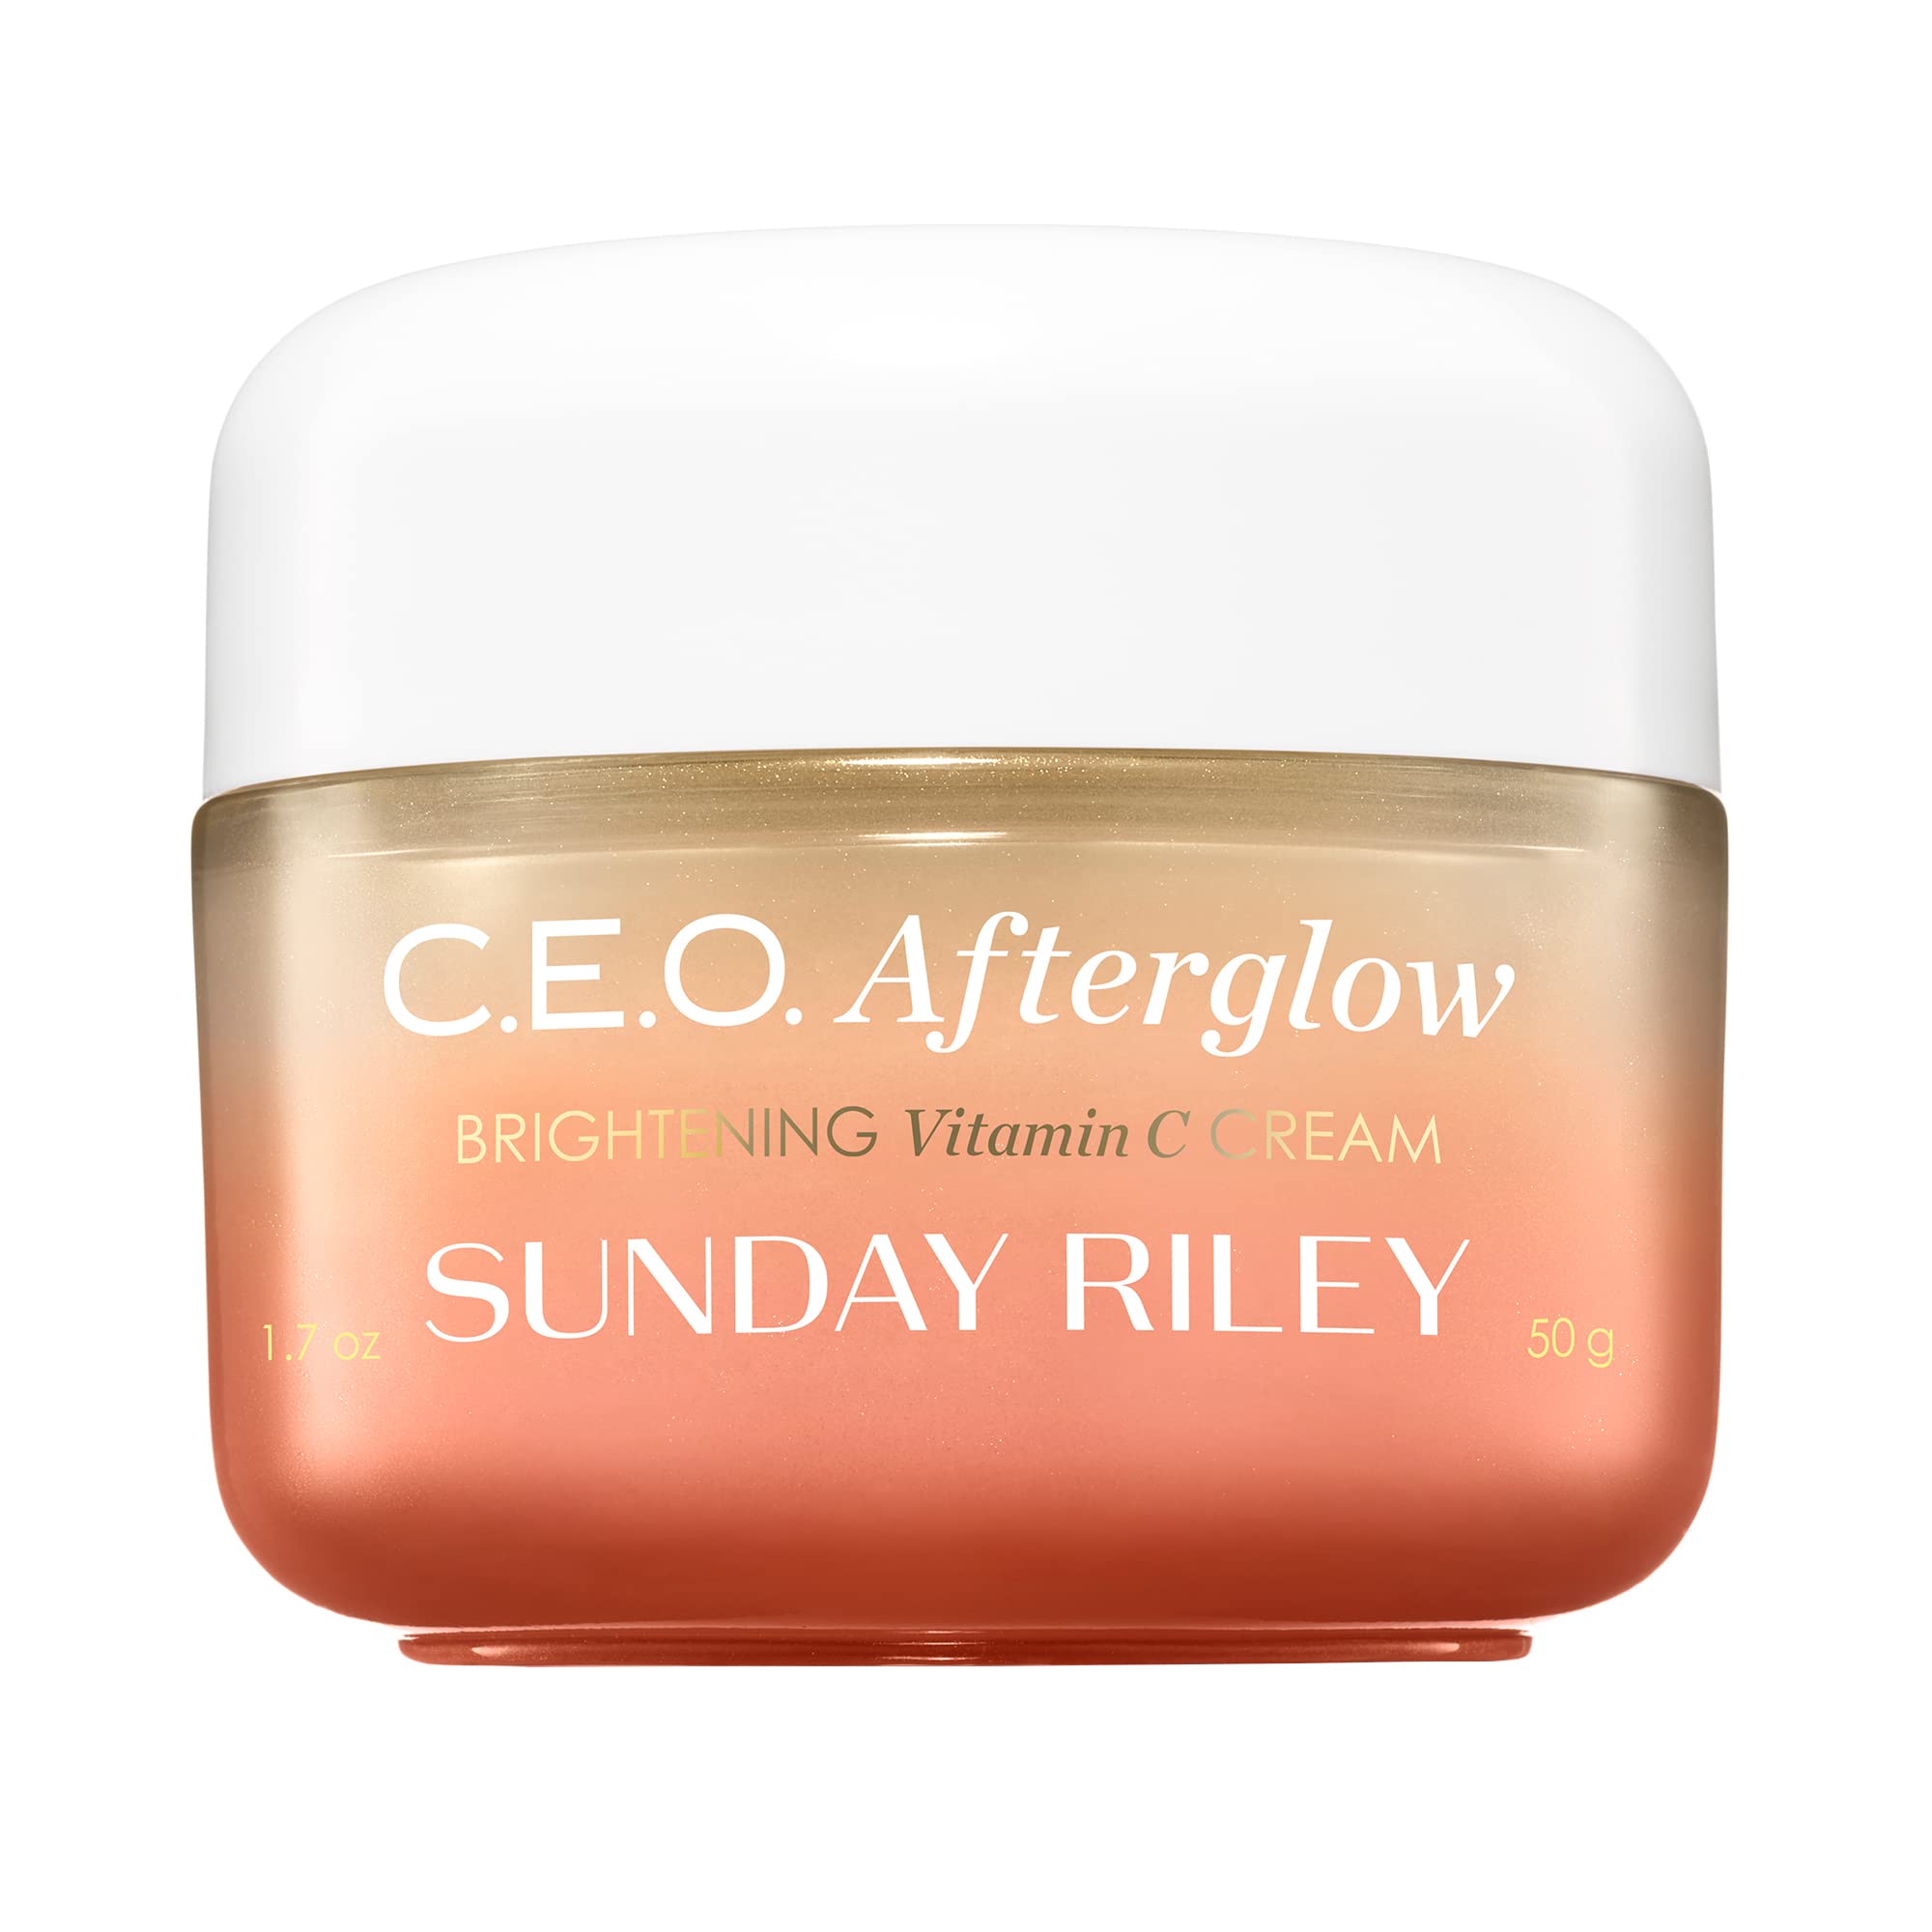 1.7-Oz Sunday Riley C.E.O. Afterglow Brightening Vitamin C Cream Face Moisturizer $32.50 + Free Shipping w/ Prime or on $35+